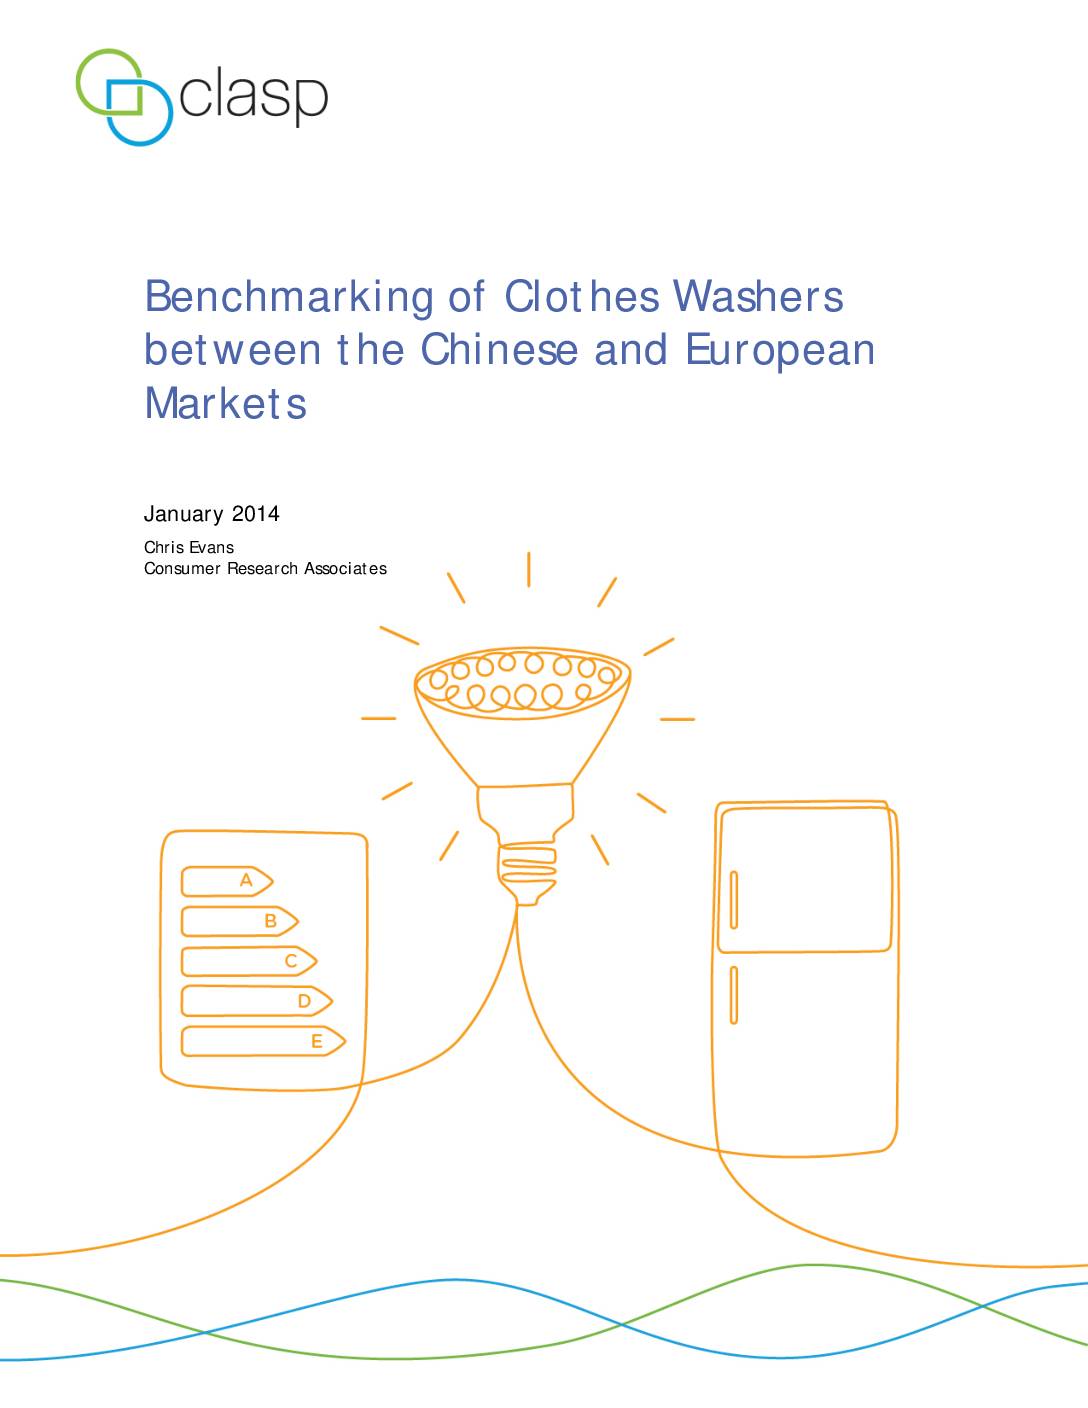 Benchmarking of Clothes Washers between the Chinese and European Markets